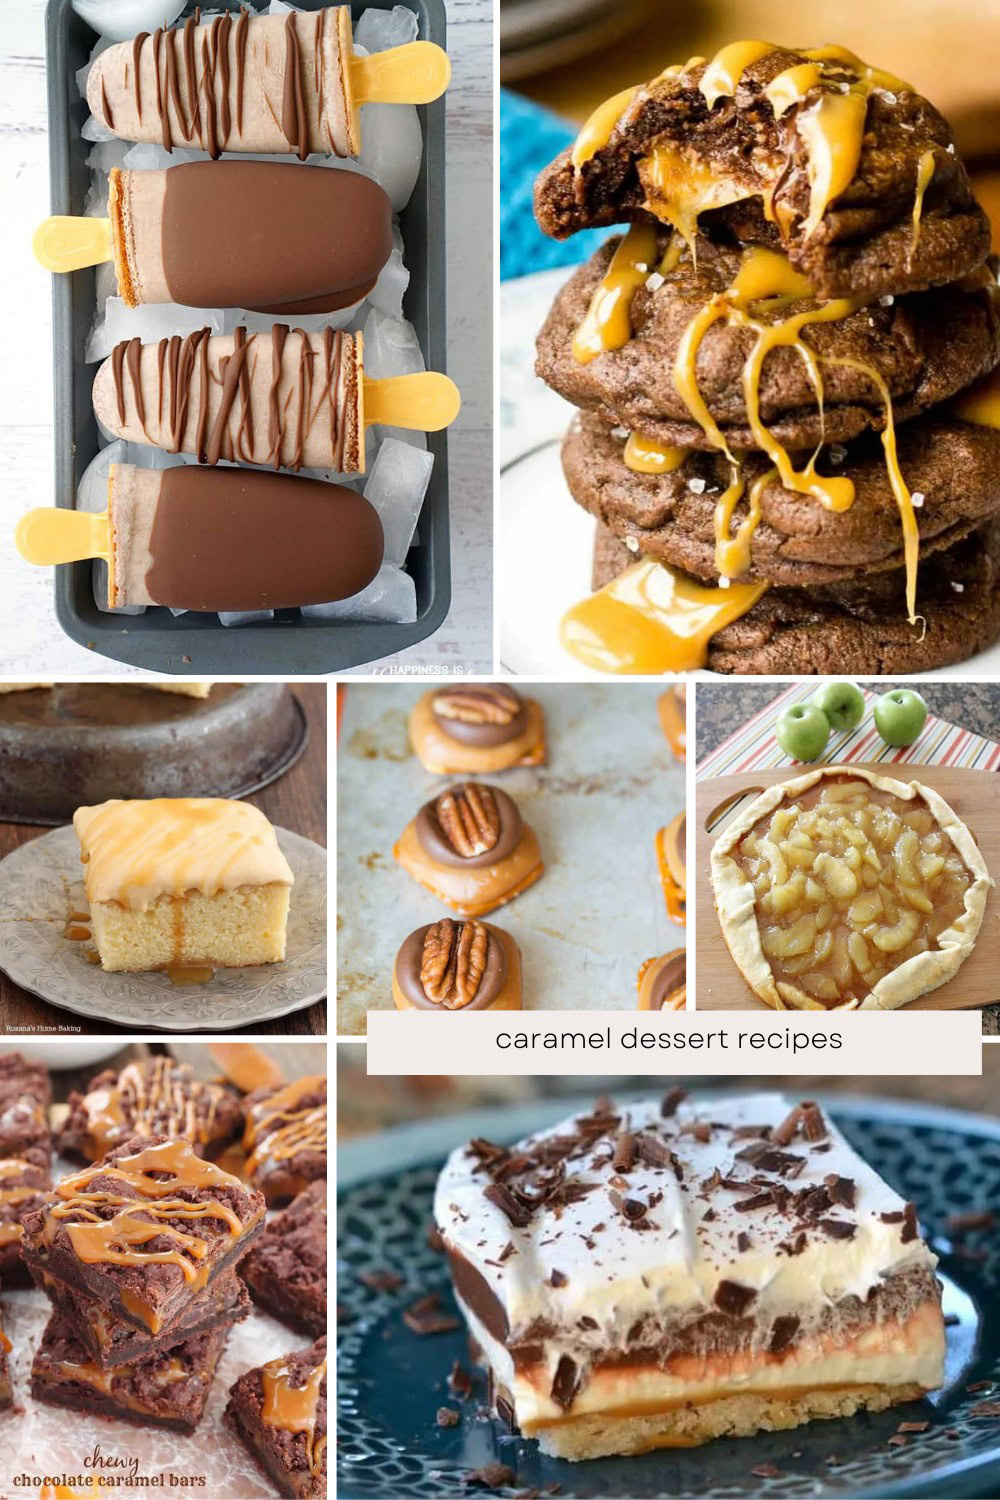 These delicious caramel dessert recipes are sure to put a smile on your face, even at the end of a bad day! Indulge in sweet, gooey delights that will lift your spirits instantly. 🍰🍮 #CaramelLovers #SweetEscape

